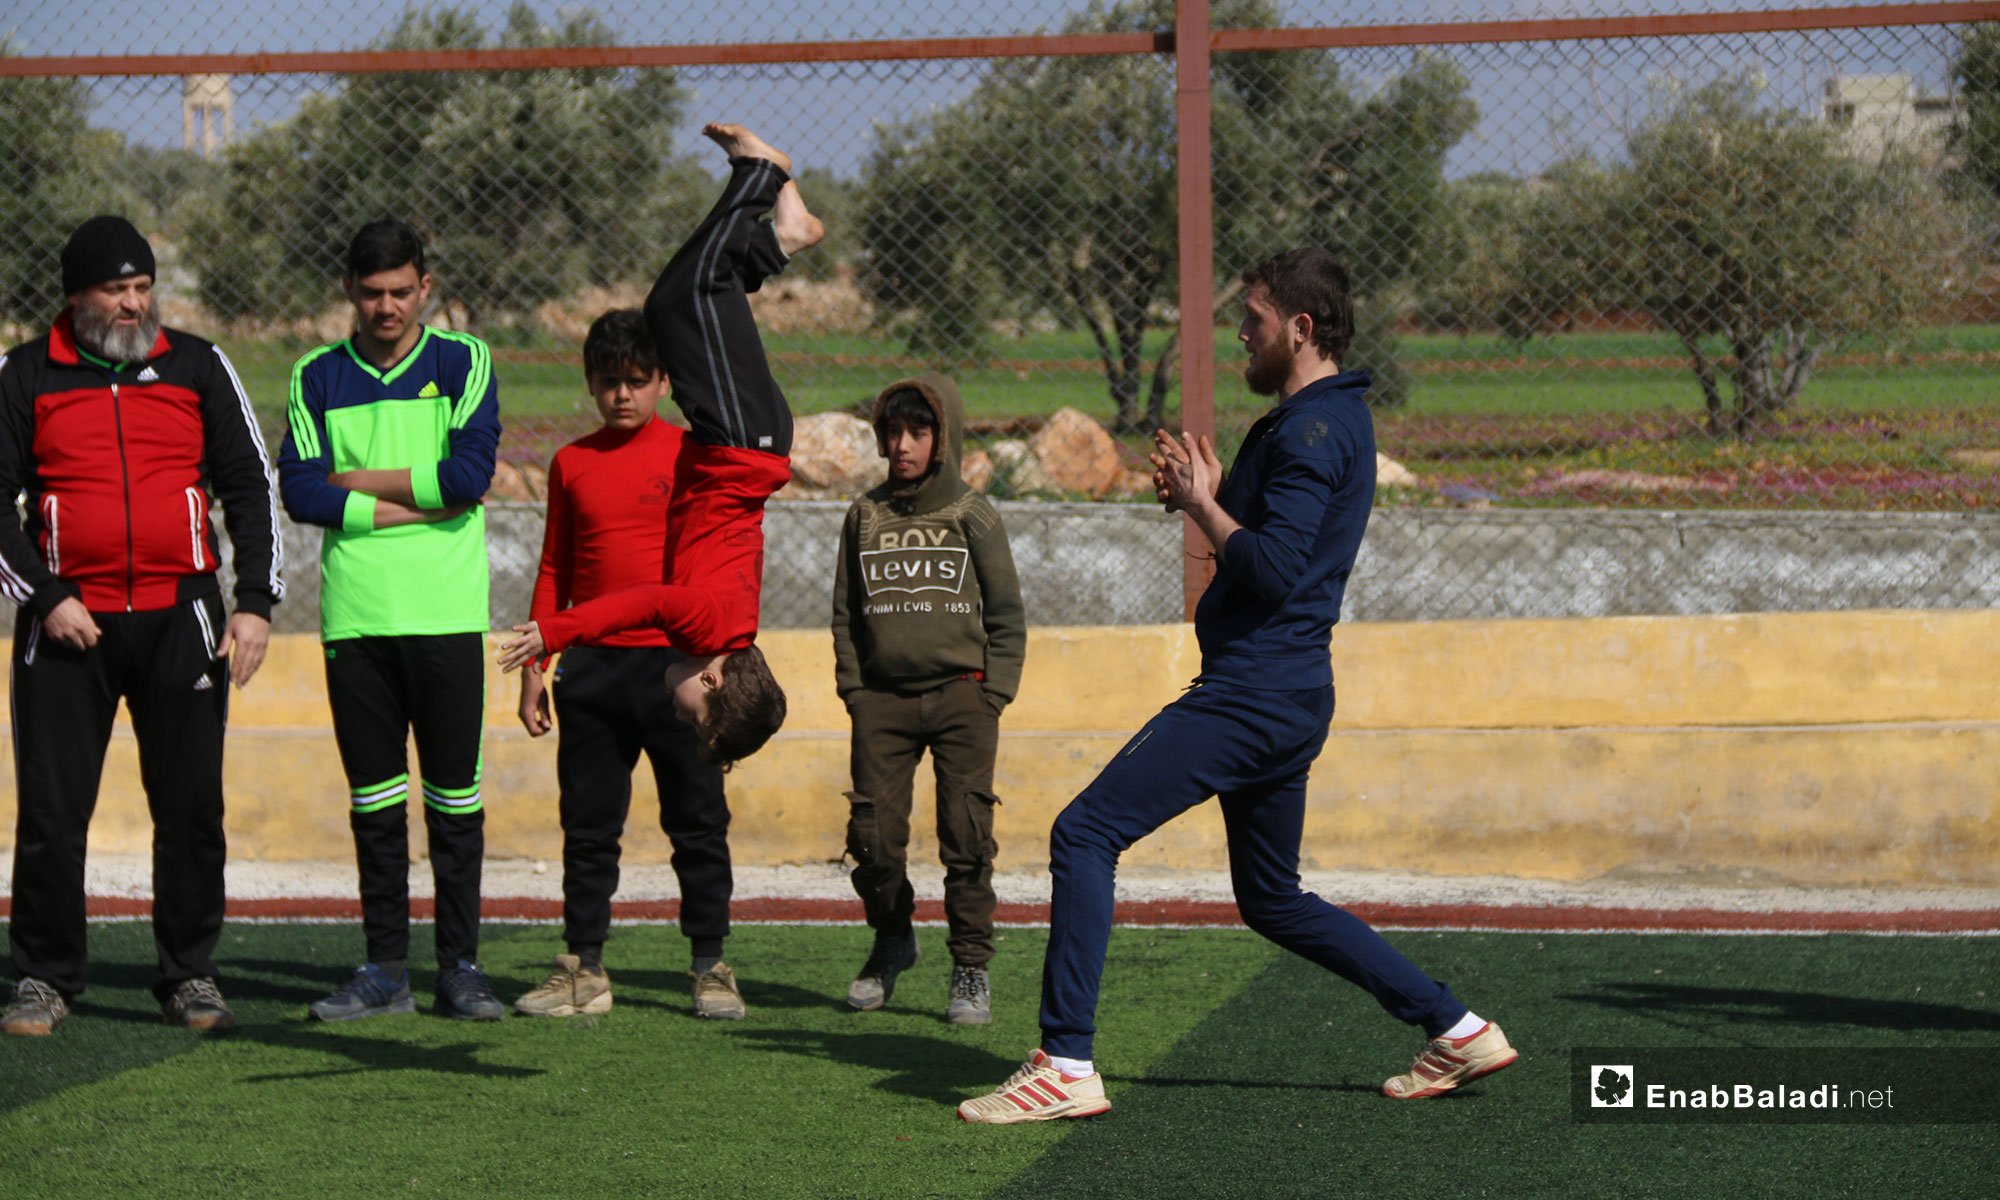 Hope Olympics for persons with disabilities in the town of al-Abazmo, rural Aleppo – March 11, 2019 (Enab Baladi)

